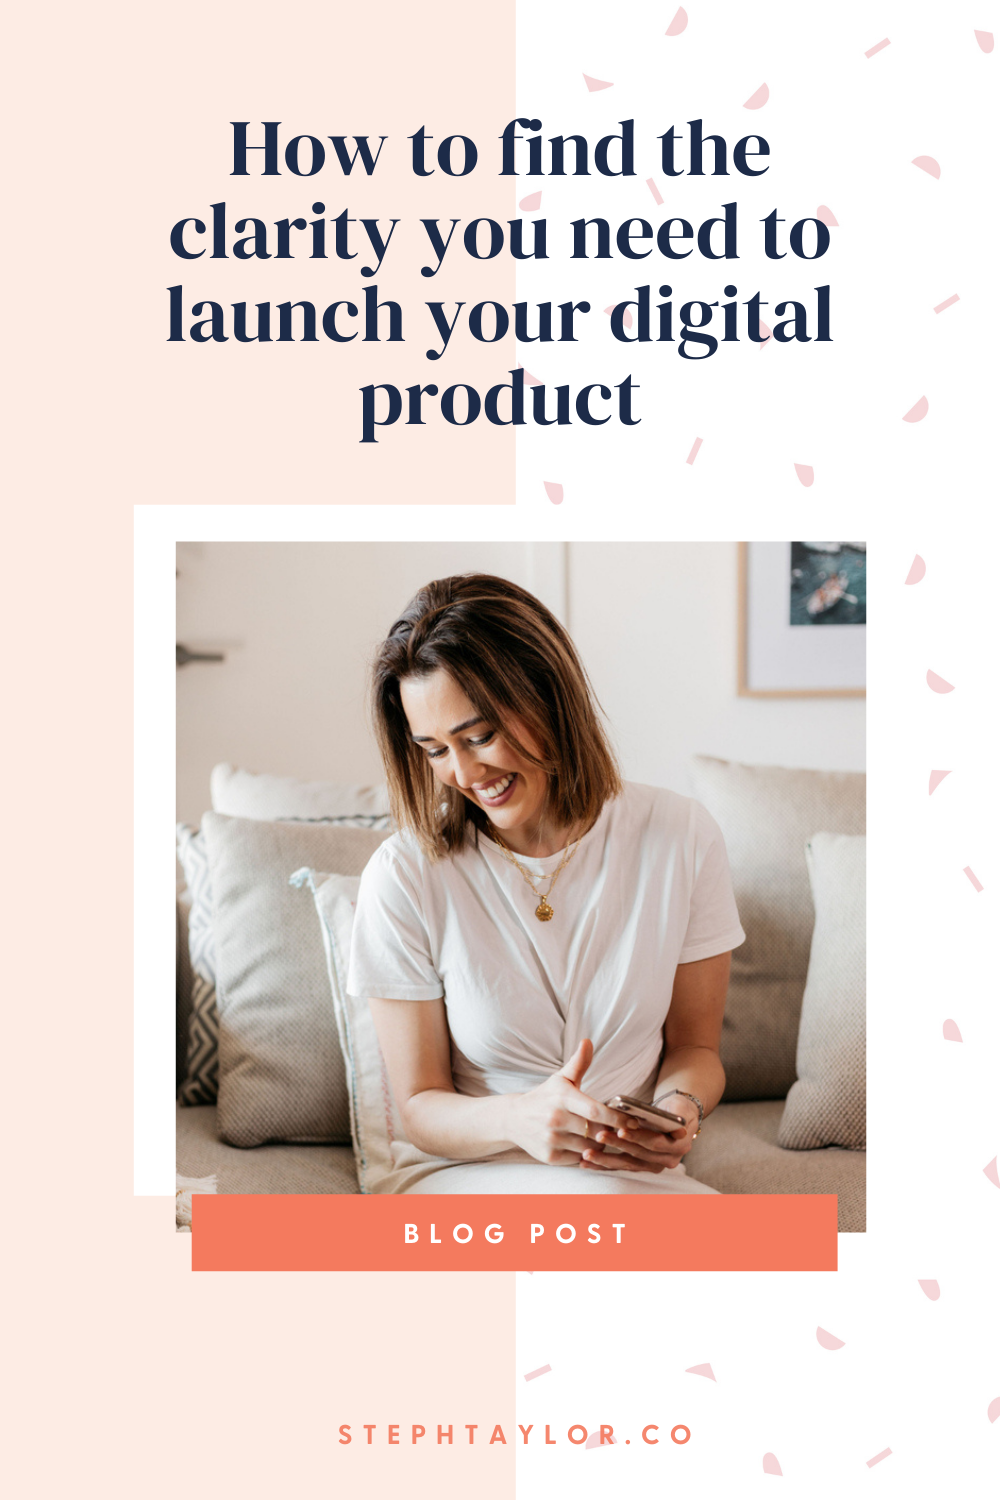 How to find the clarity to launch your digital product